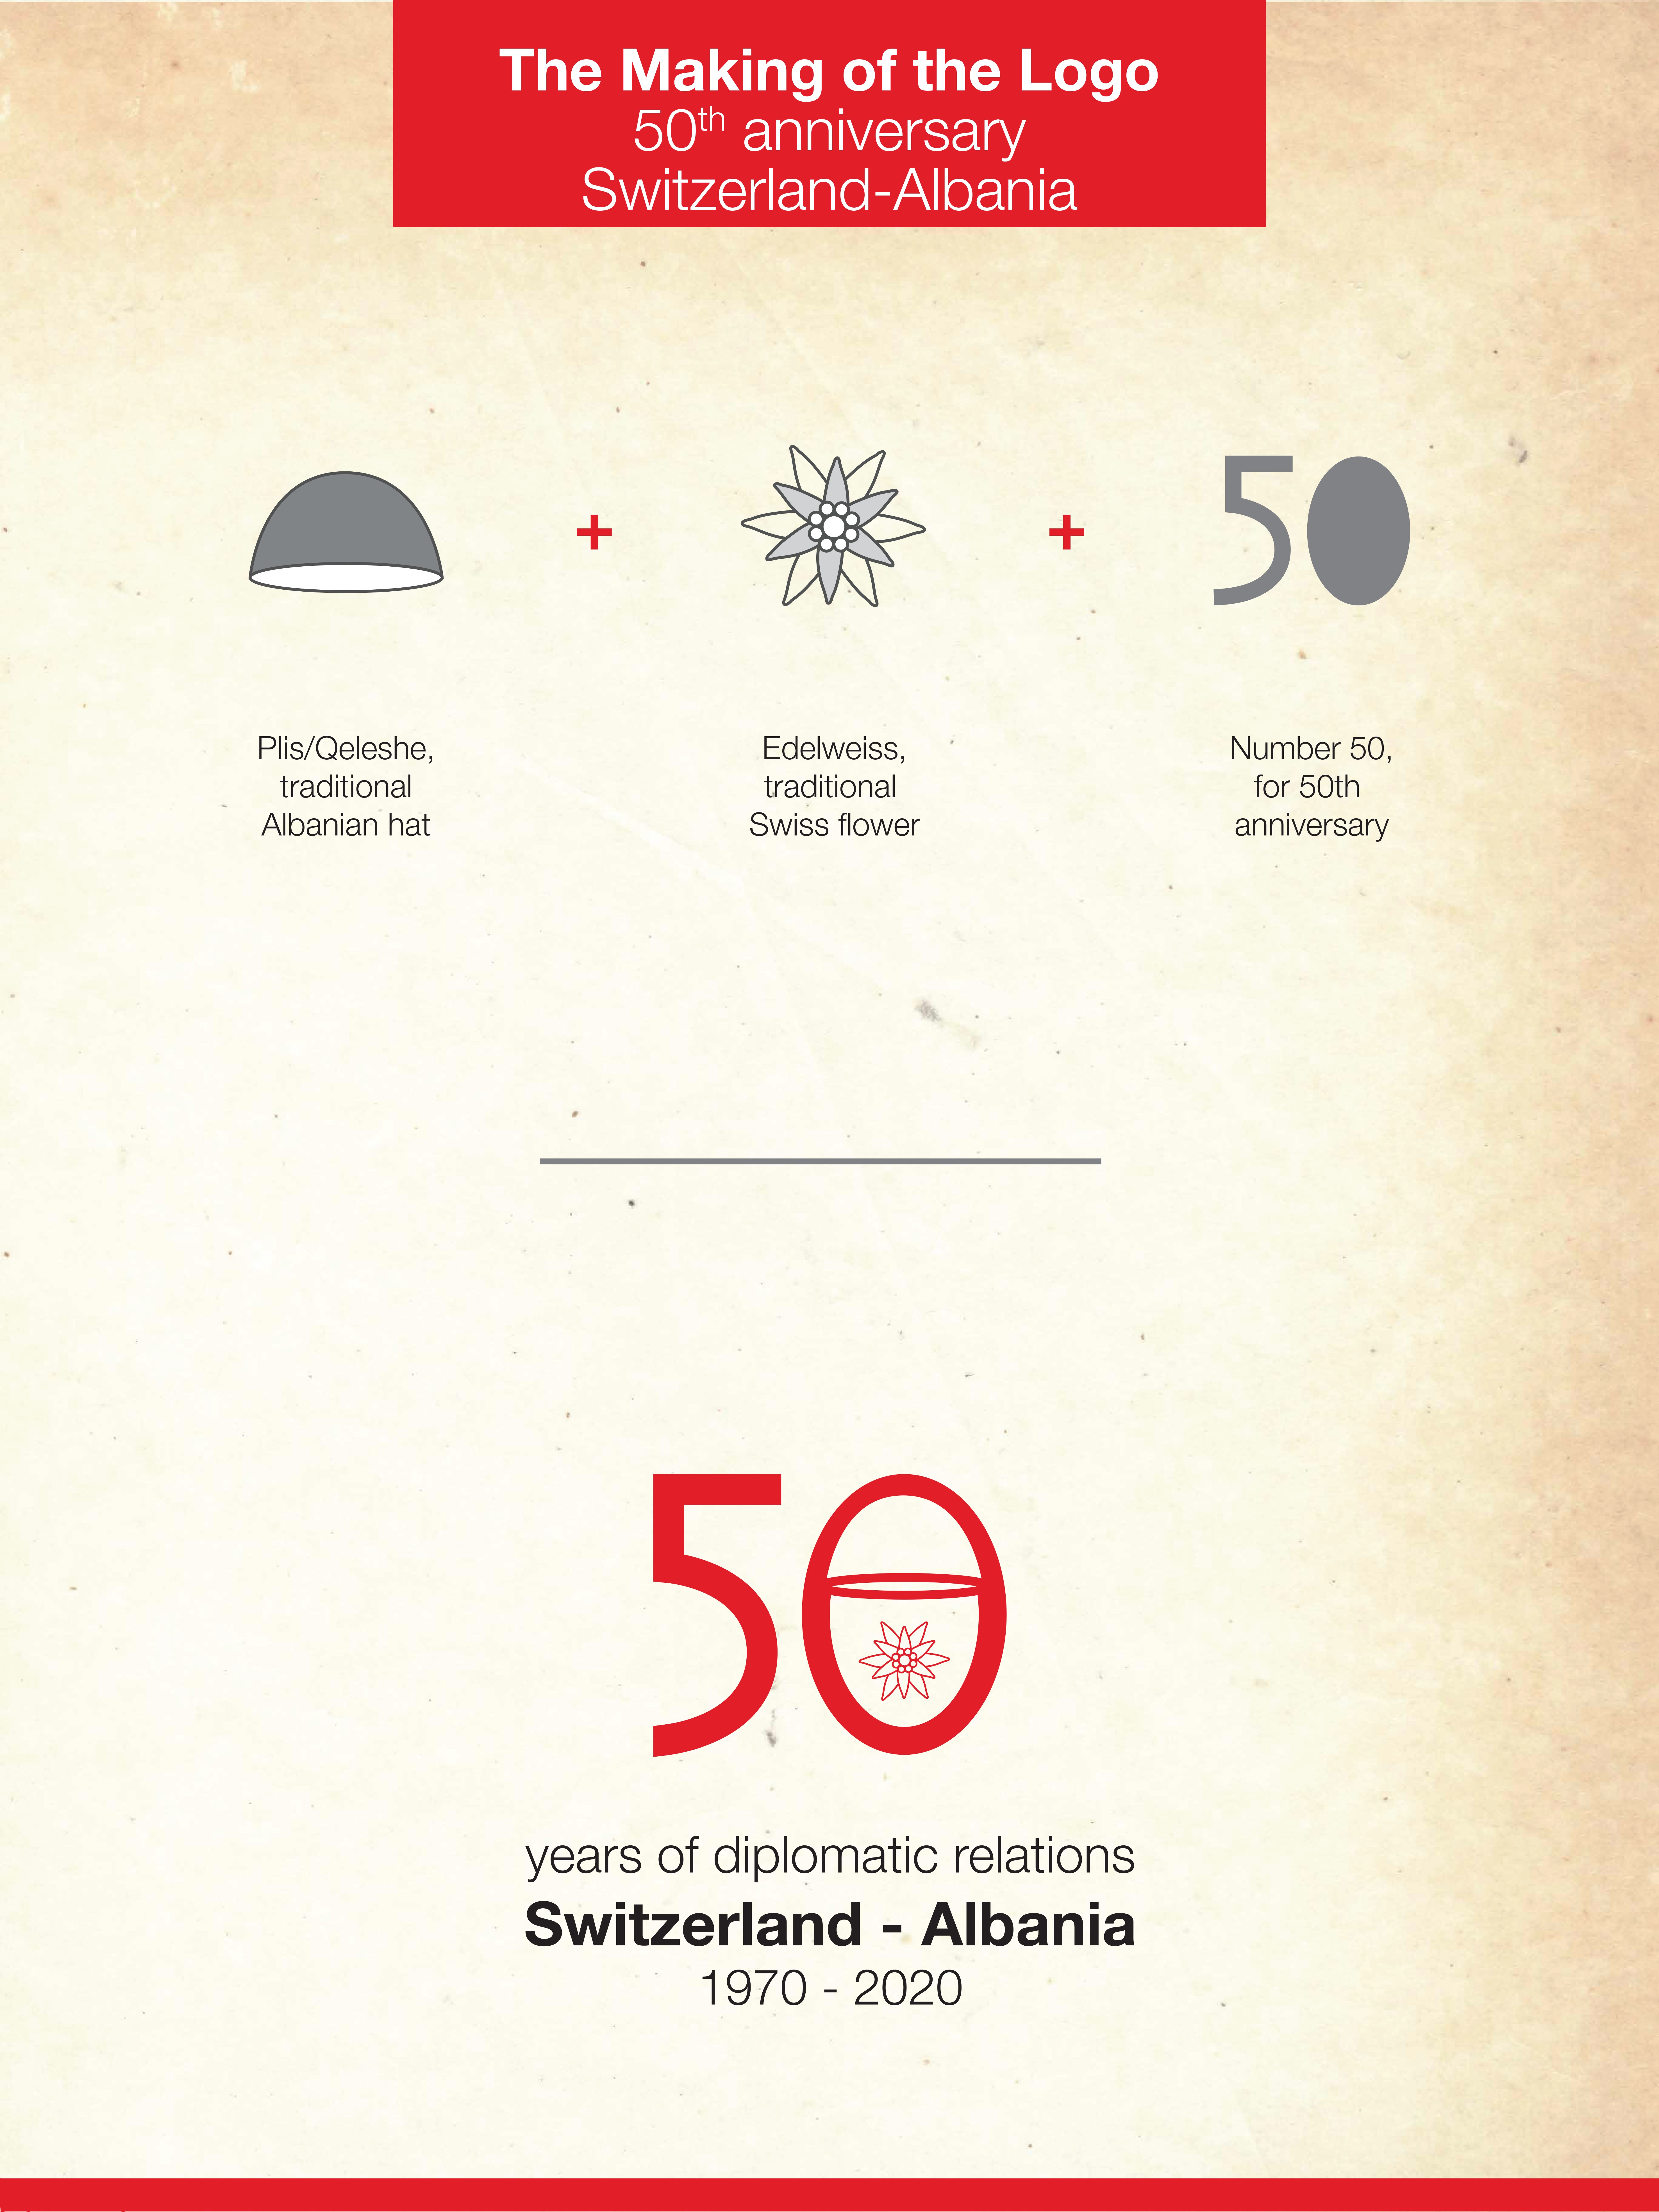 Poster showing the making of the logo of the 50th anniversary Switzerland-Albania